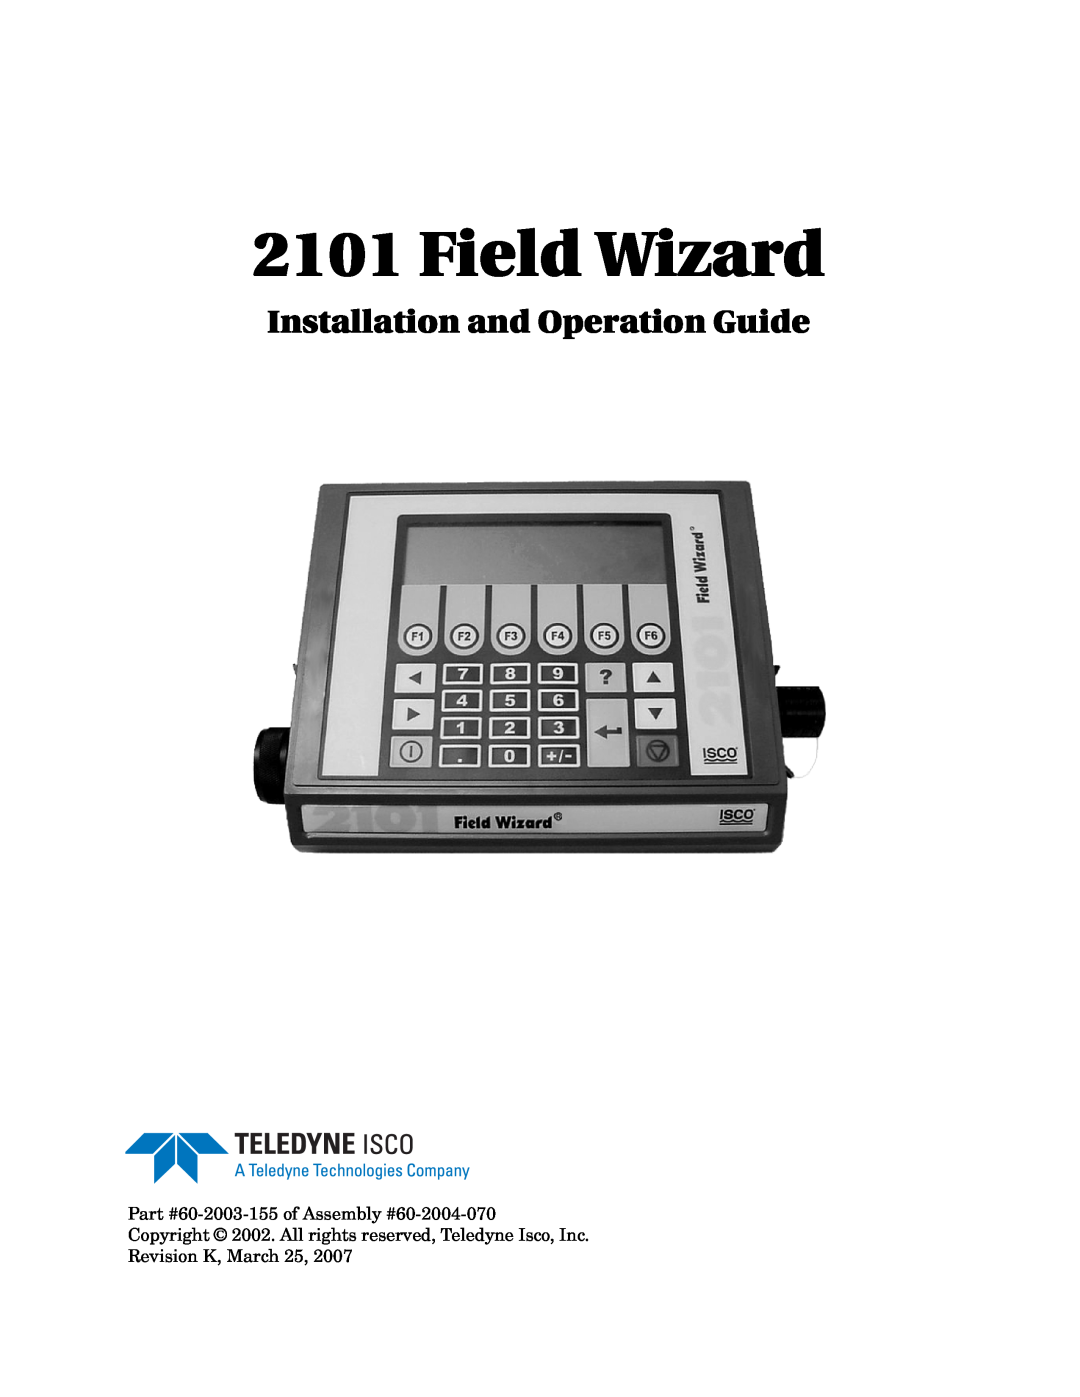 Teledyne 2101 installation and operation guide Field Wizard, Installation and Operation Guide 